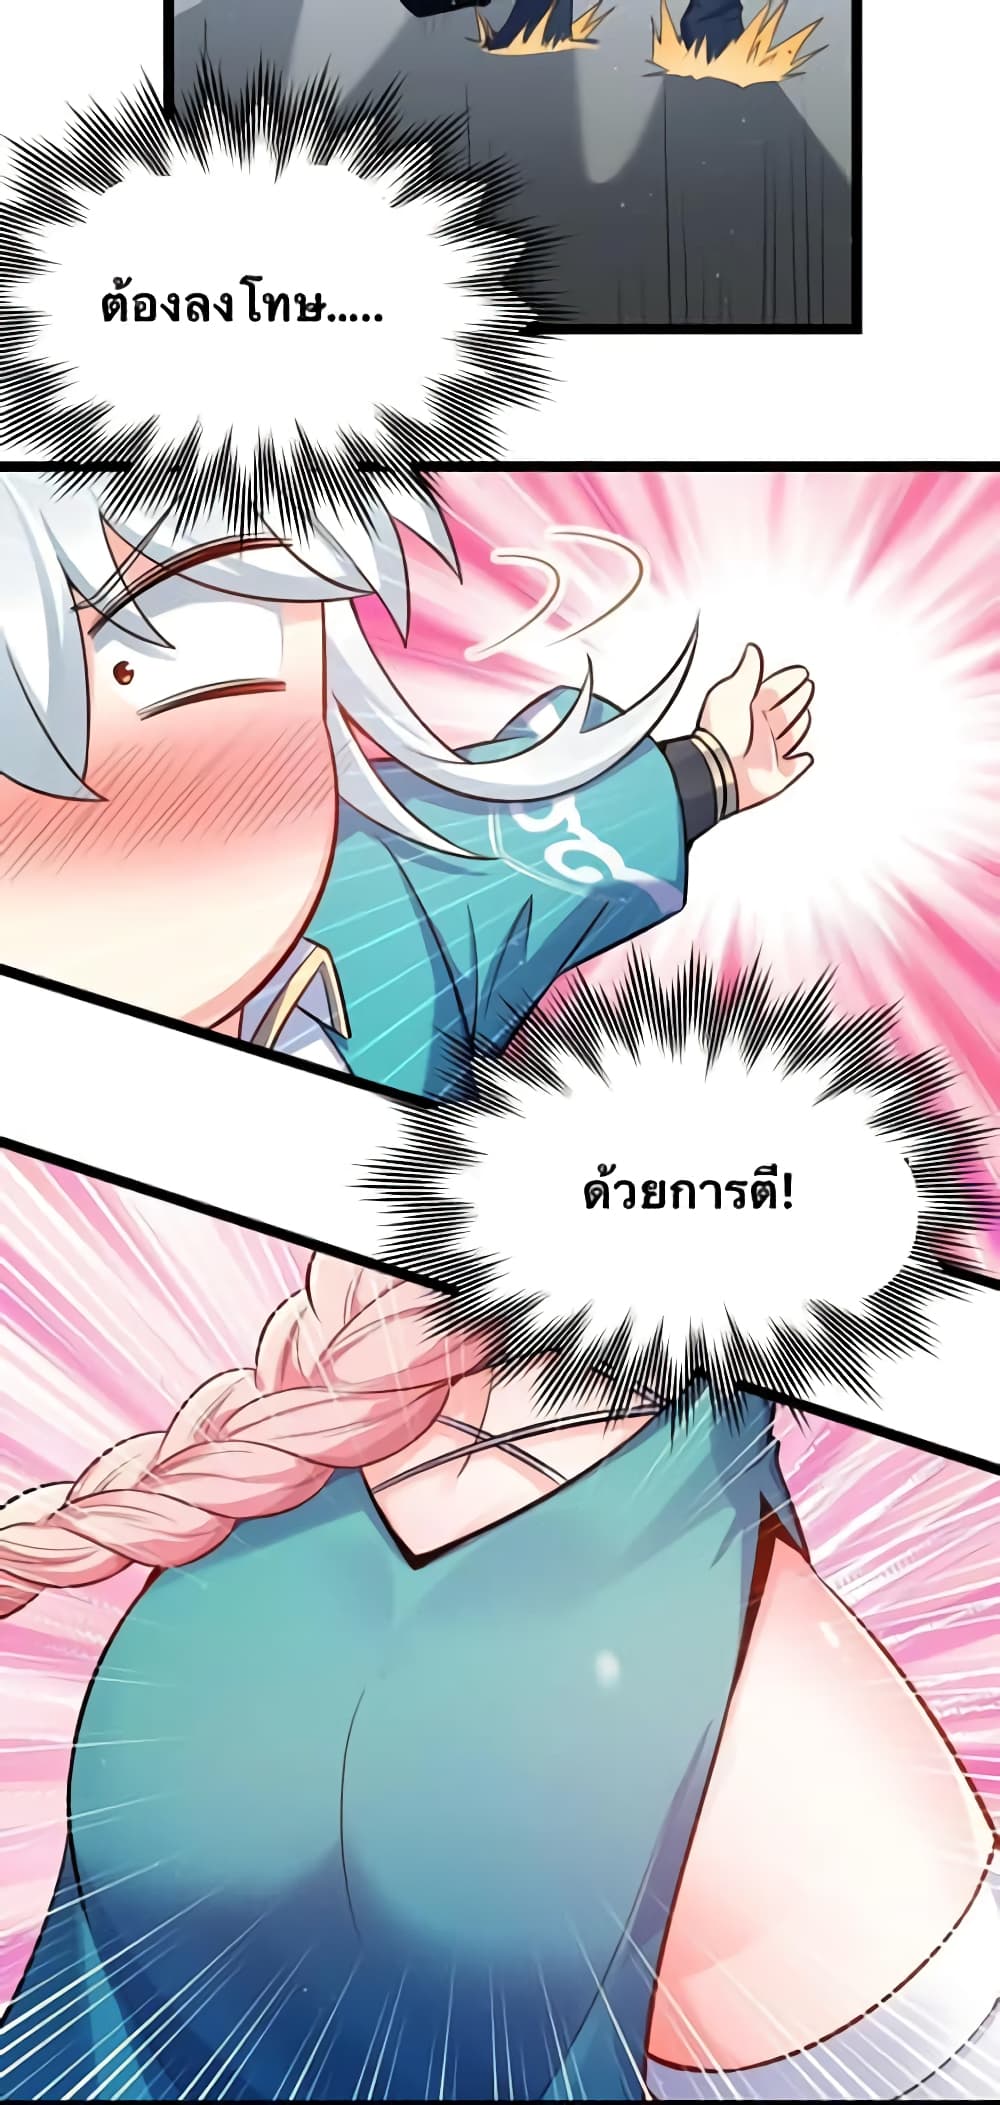 Godsian Masian from Another World ตอนที่ 95 (16)